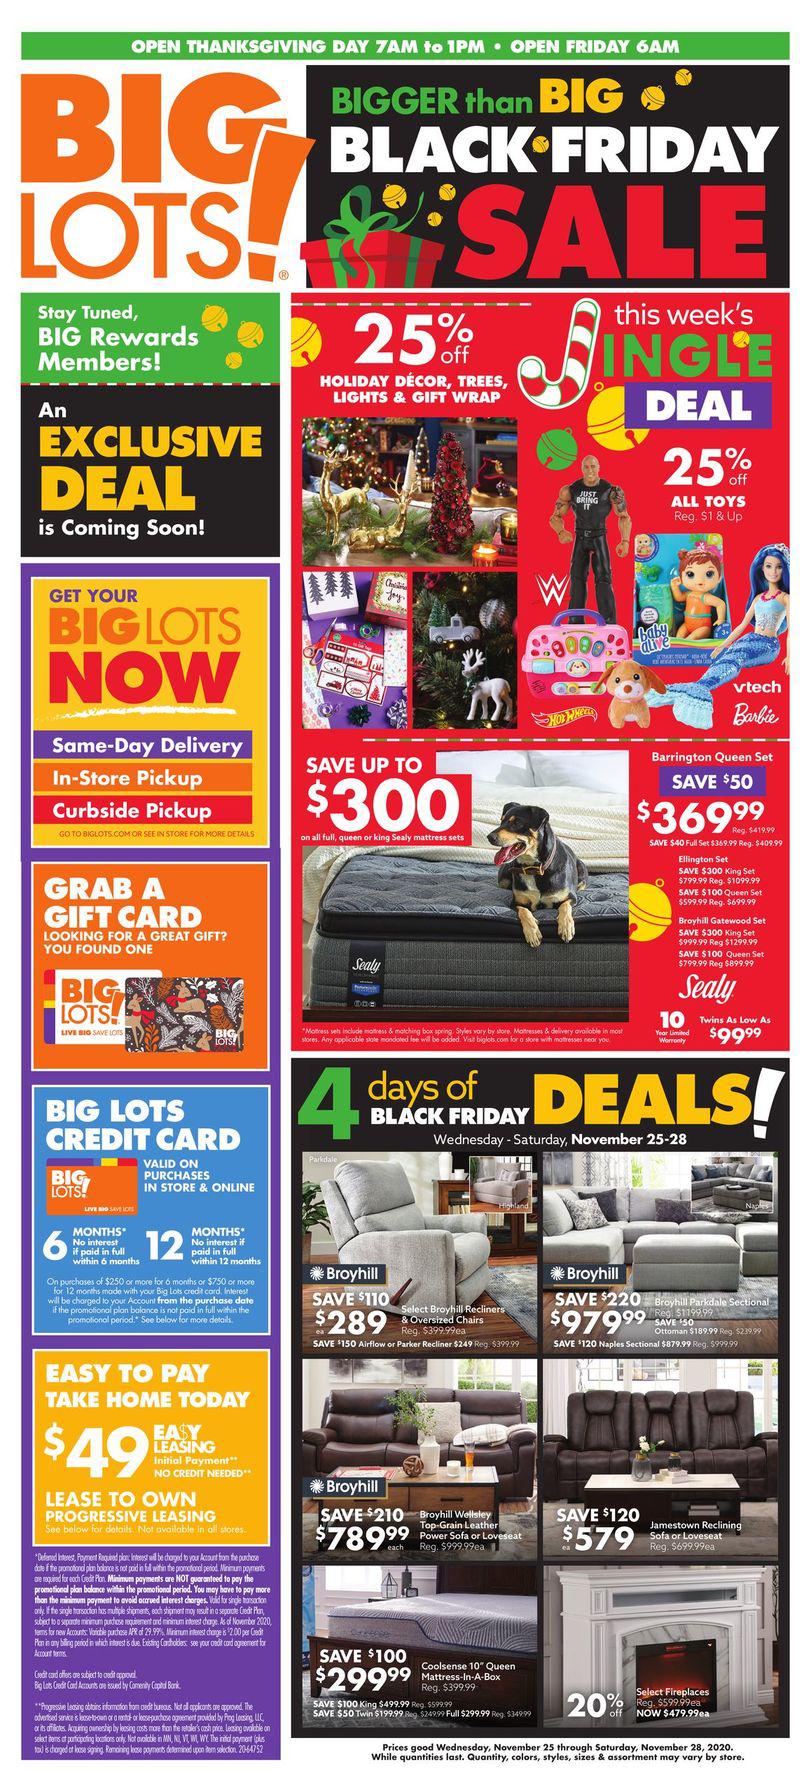 Big Lots Black Friday Sale Ad 2021 - When To Black Friday 2021 Deals Start